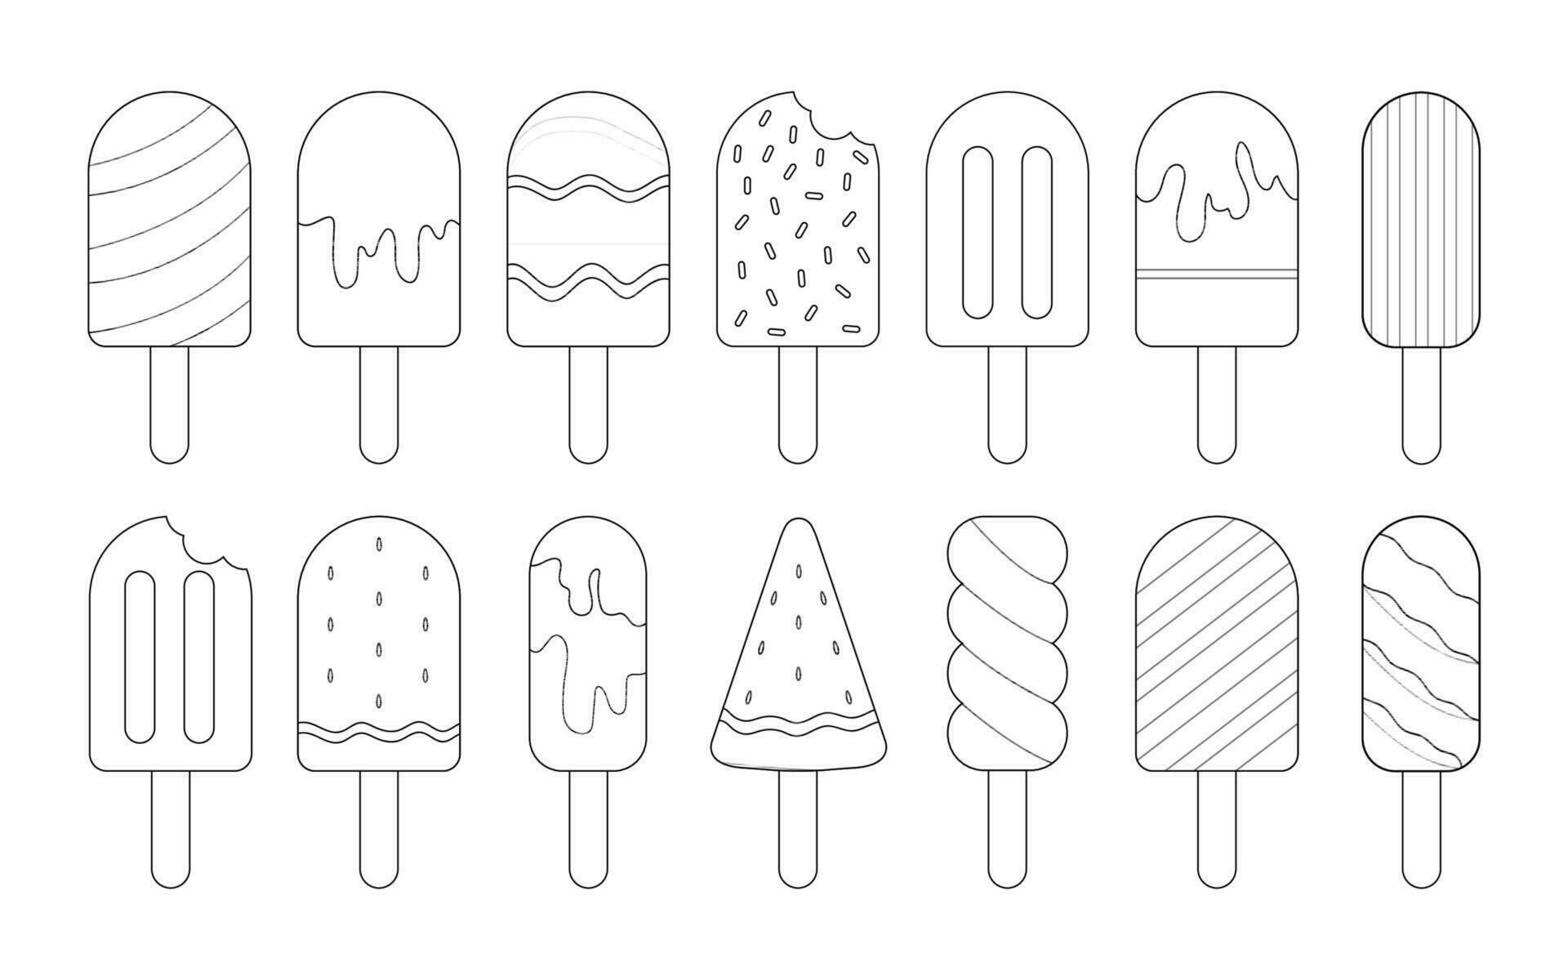 Black and white Ice cream cone icon set 8 elements. Coloring book page for adults and kids. Summer fast food vector illustration for gift card, flyer, certificate or banner, icon, logo, patch, sticker